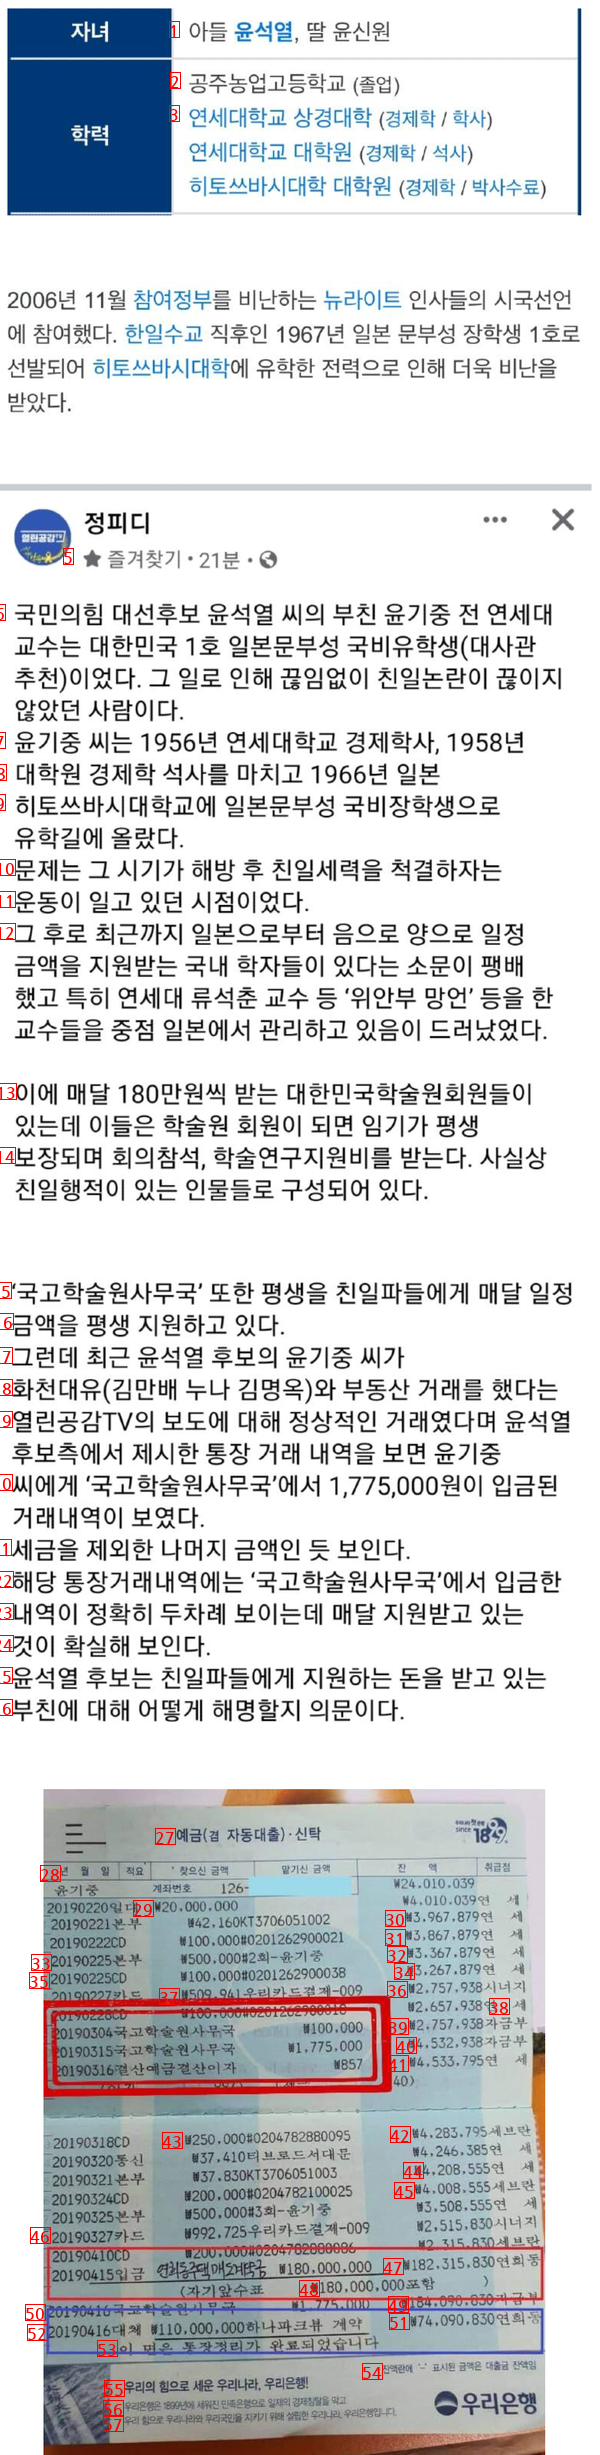 1.7 million won per month. How much is this for 20 years?jpg